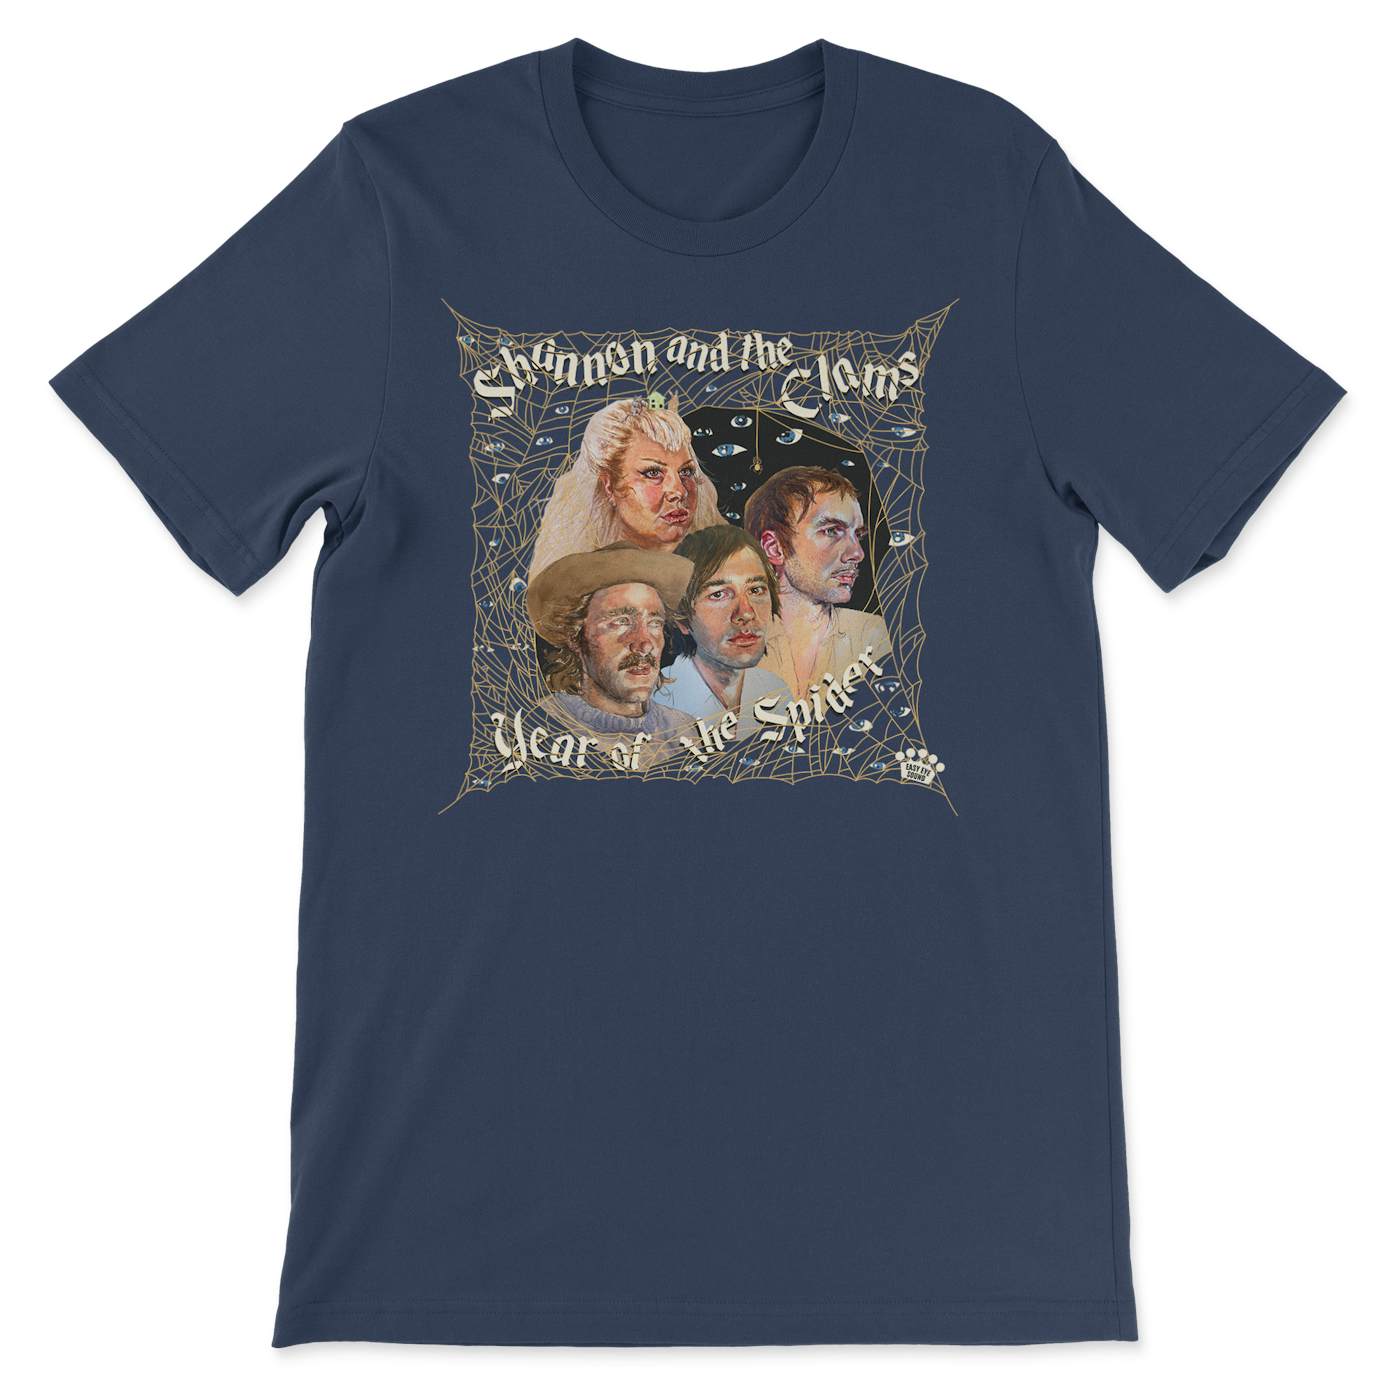 Shannon & The Clams - Year Of The Spider [T-Shirt]